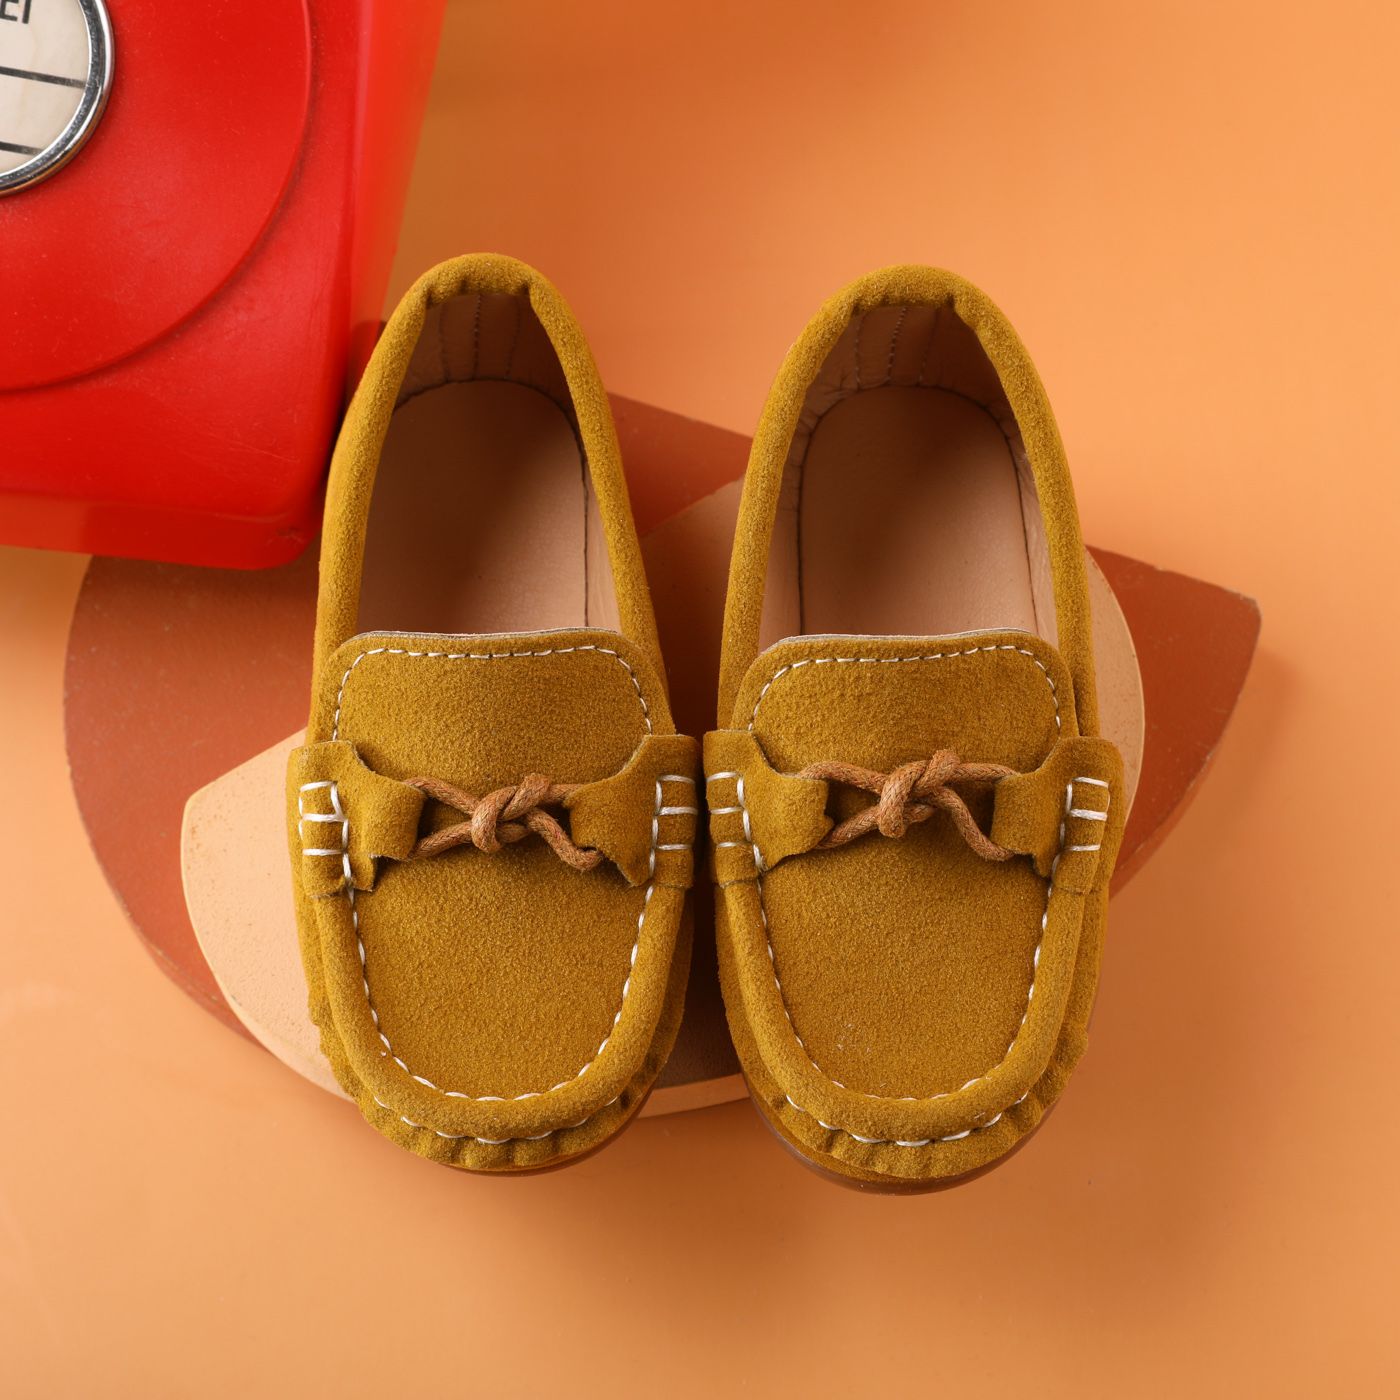 Toddler / Kid Comfortable Moccasin Casual Shoes